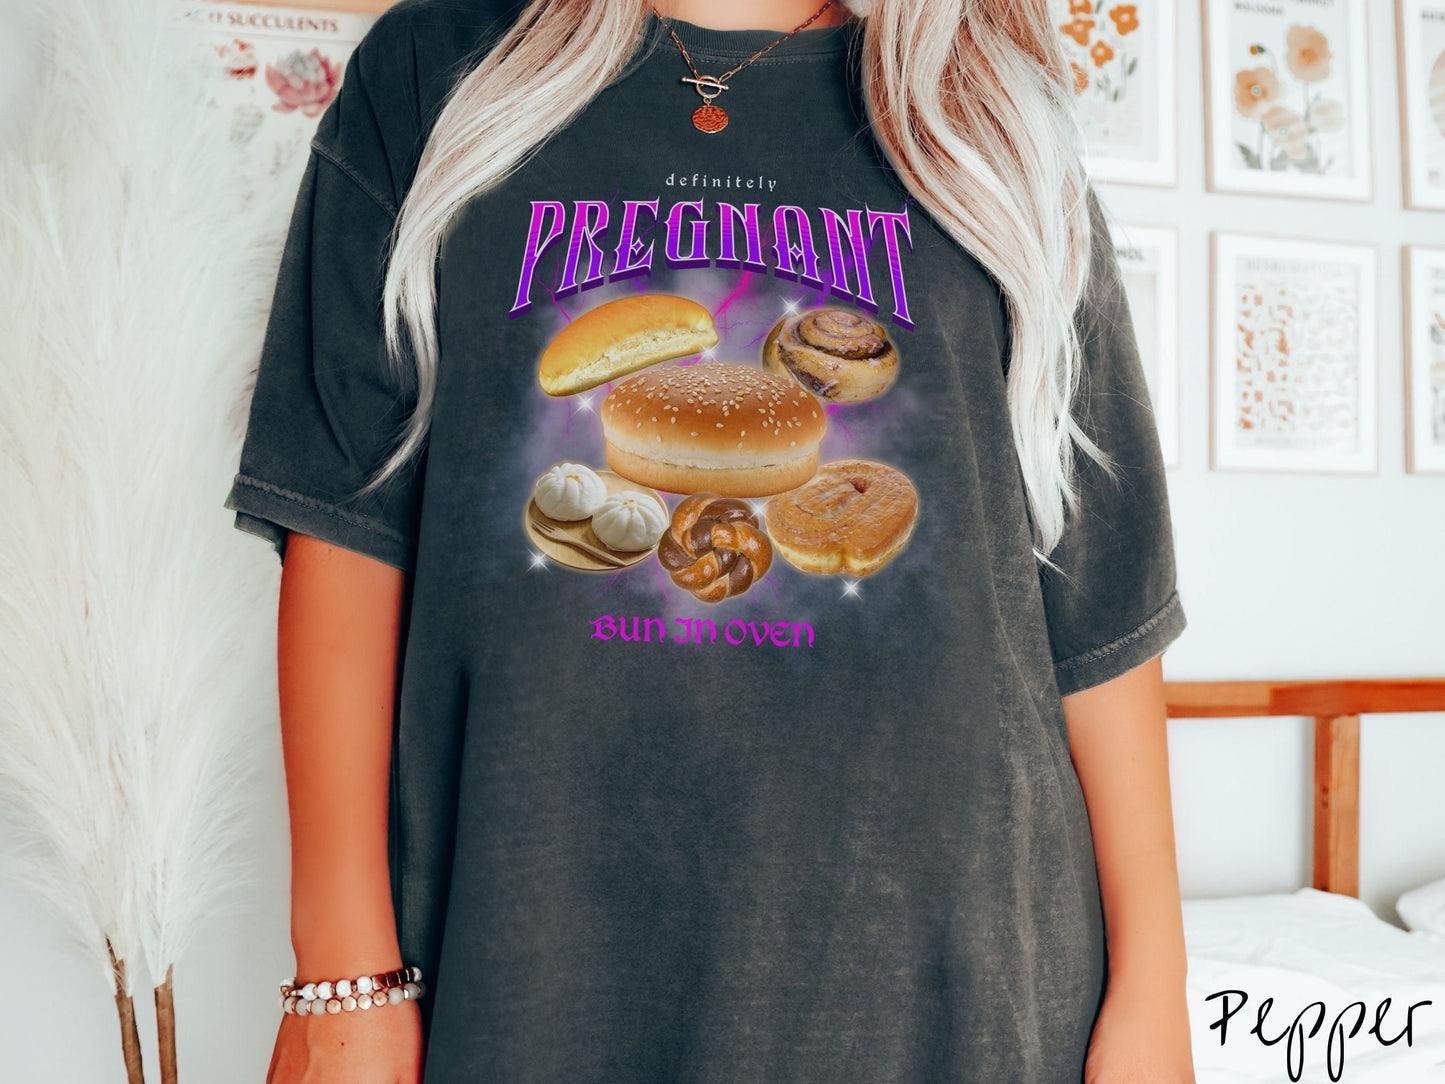 A woman wearing a vintage, pepper colored Comfort Colors t-shirt with the text Definitely Pregnant Bun In Oven in purple font. Between the text are different breads like hamburger and hotdog buns, cinnamon rolls, and donuts.